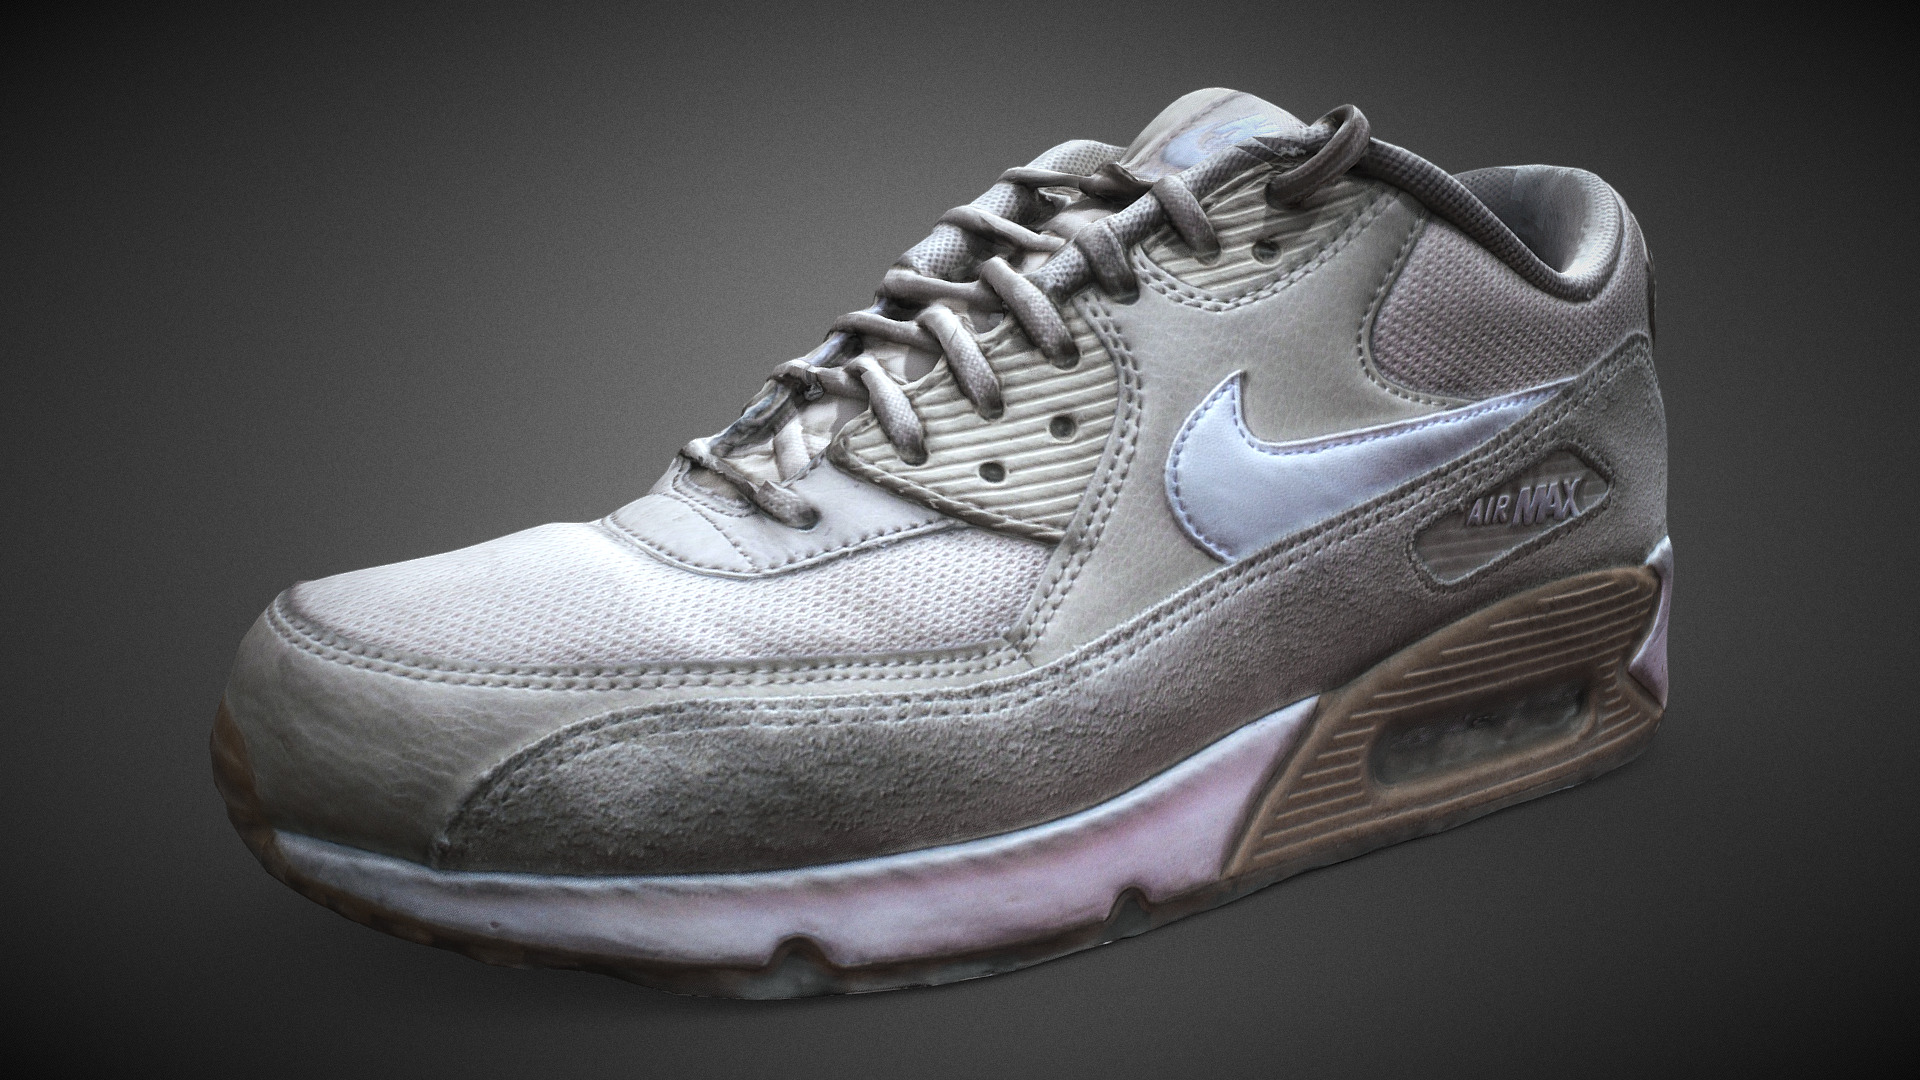 3D model Nike AirMax - This is a 3D model of the Nike AirMax. The 3D model is about a close up of a shoe.